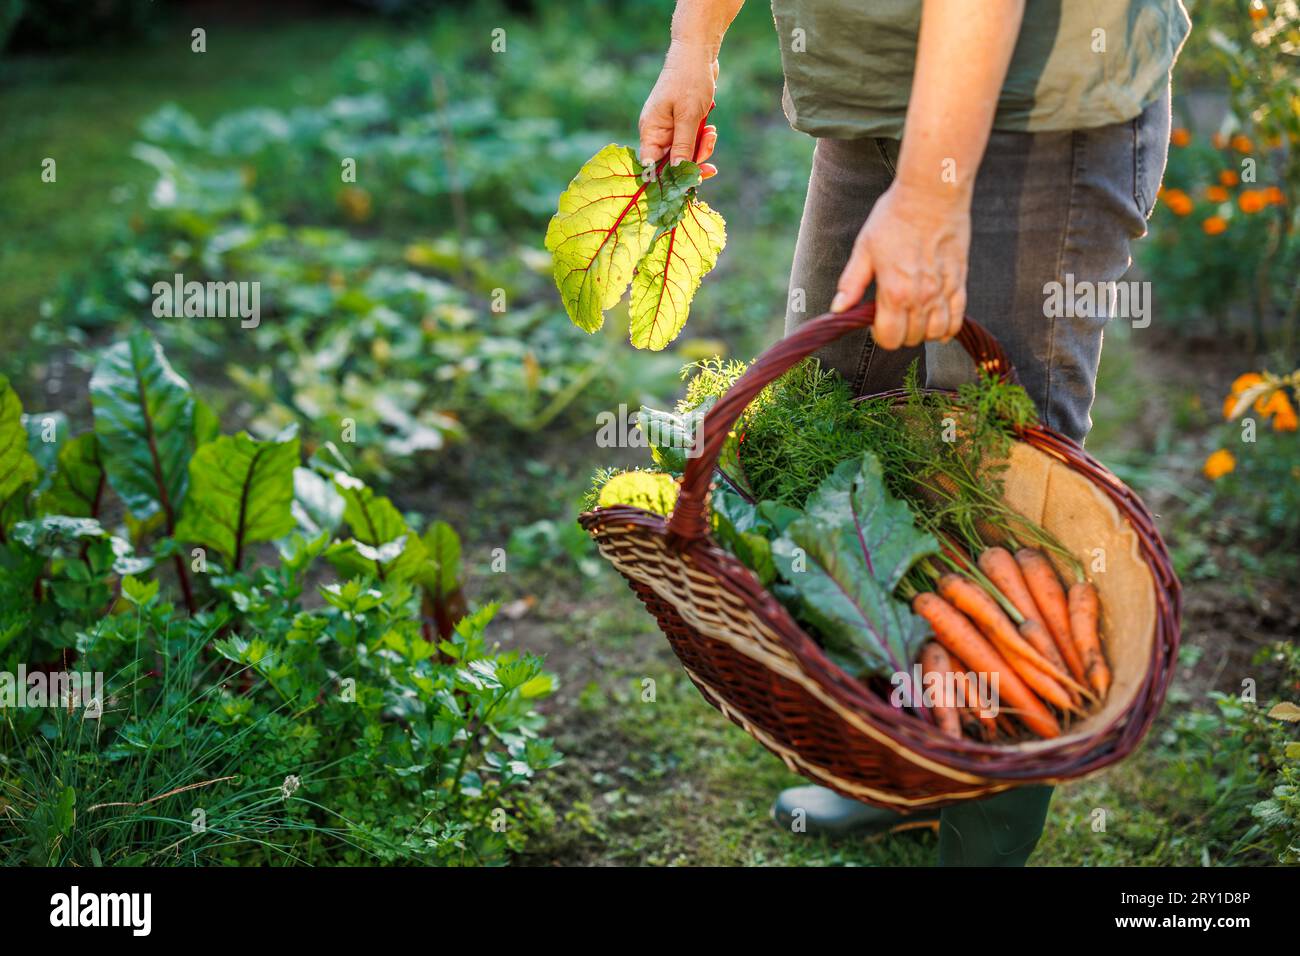 Woman farmer harvesting mangold leaves and carrots from her organic vegetable garden Stock Photo